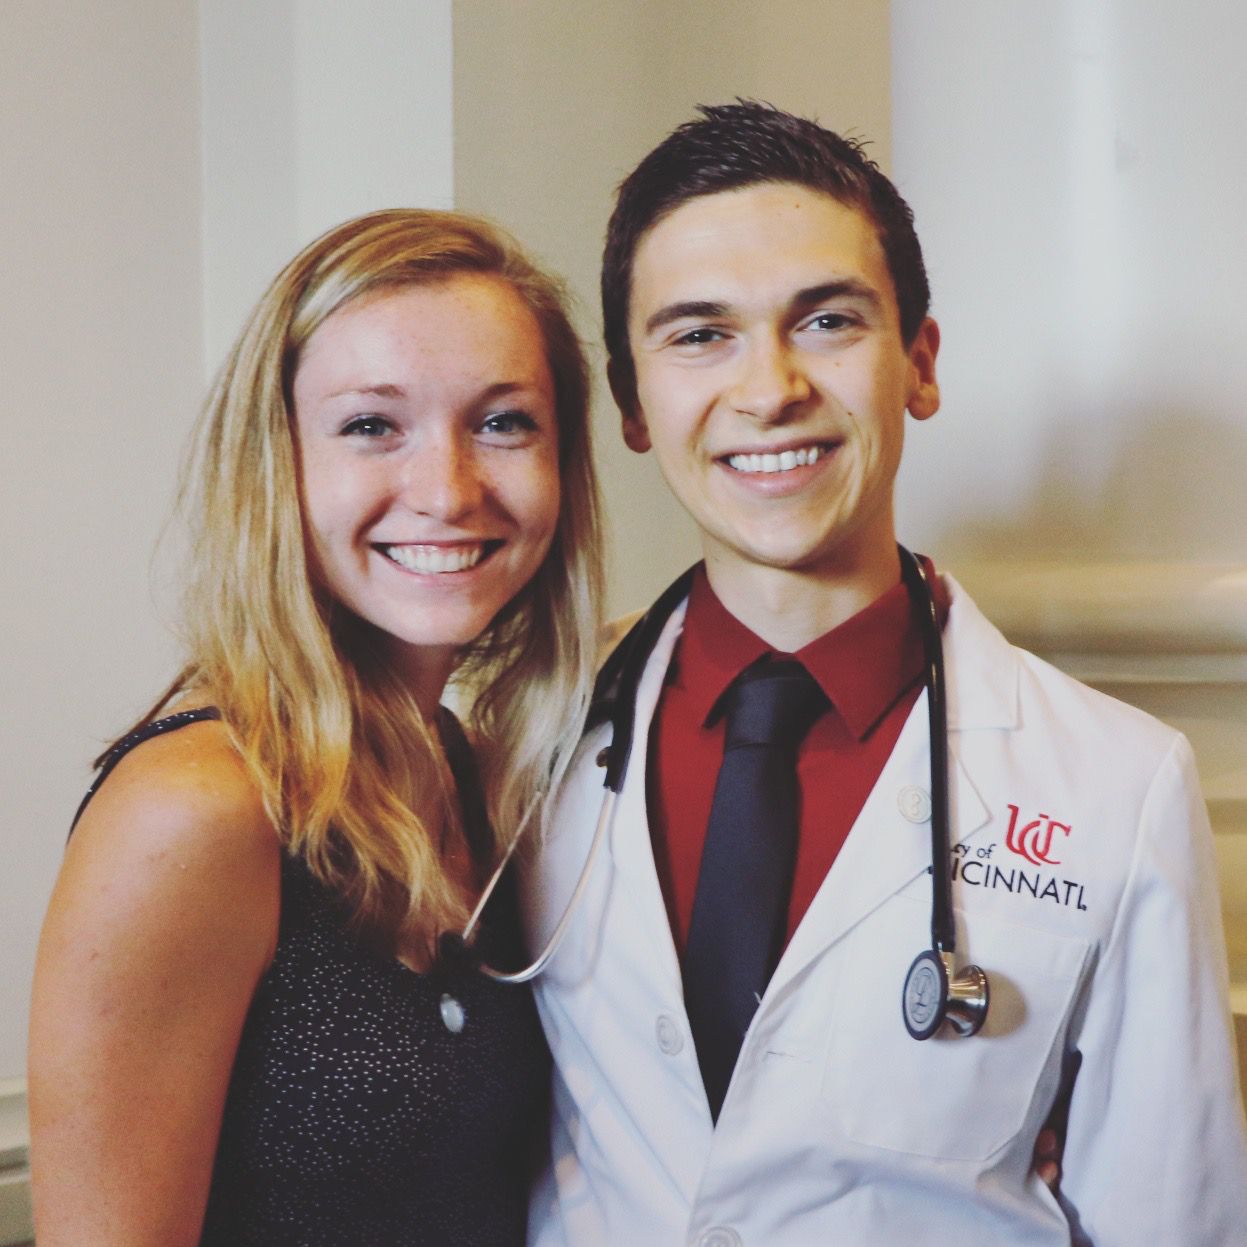 UC medical students celebrate Match Day